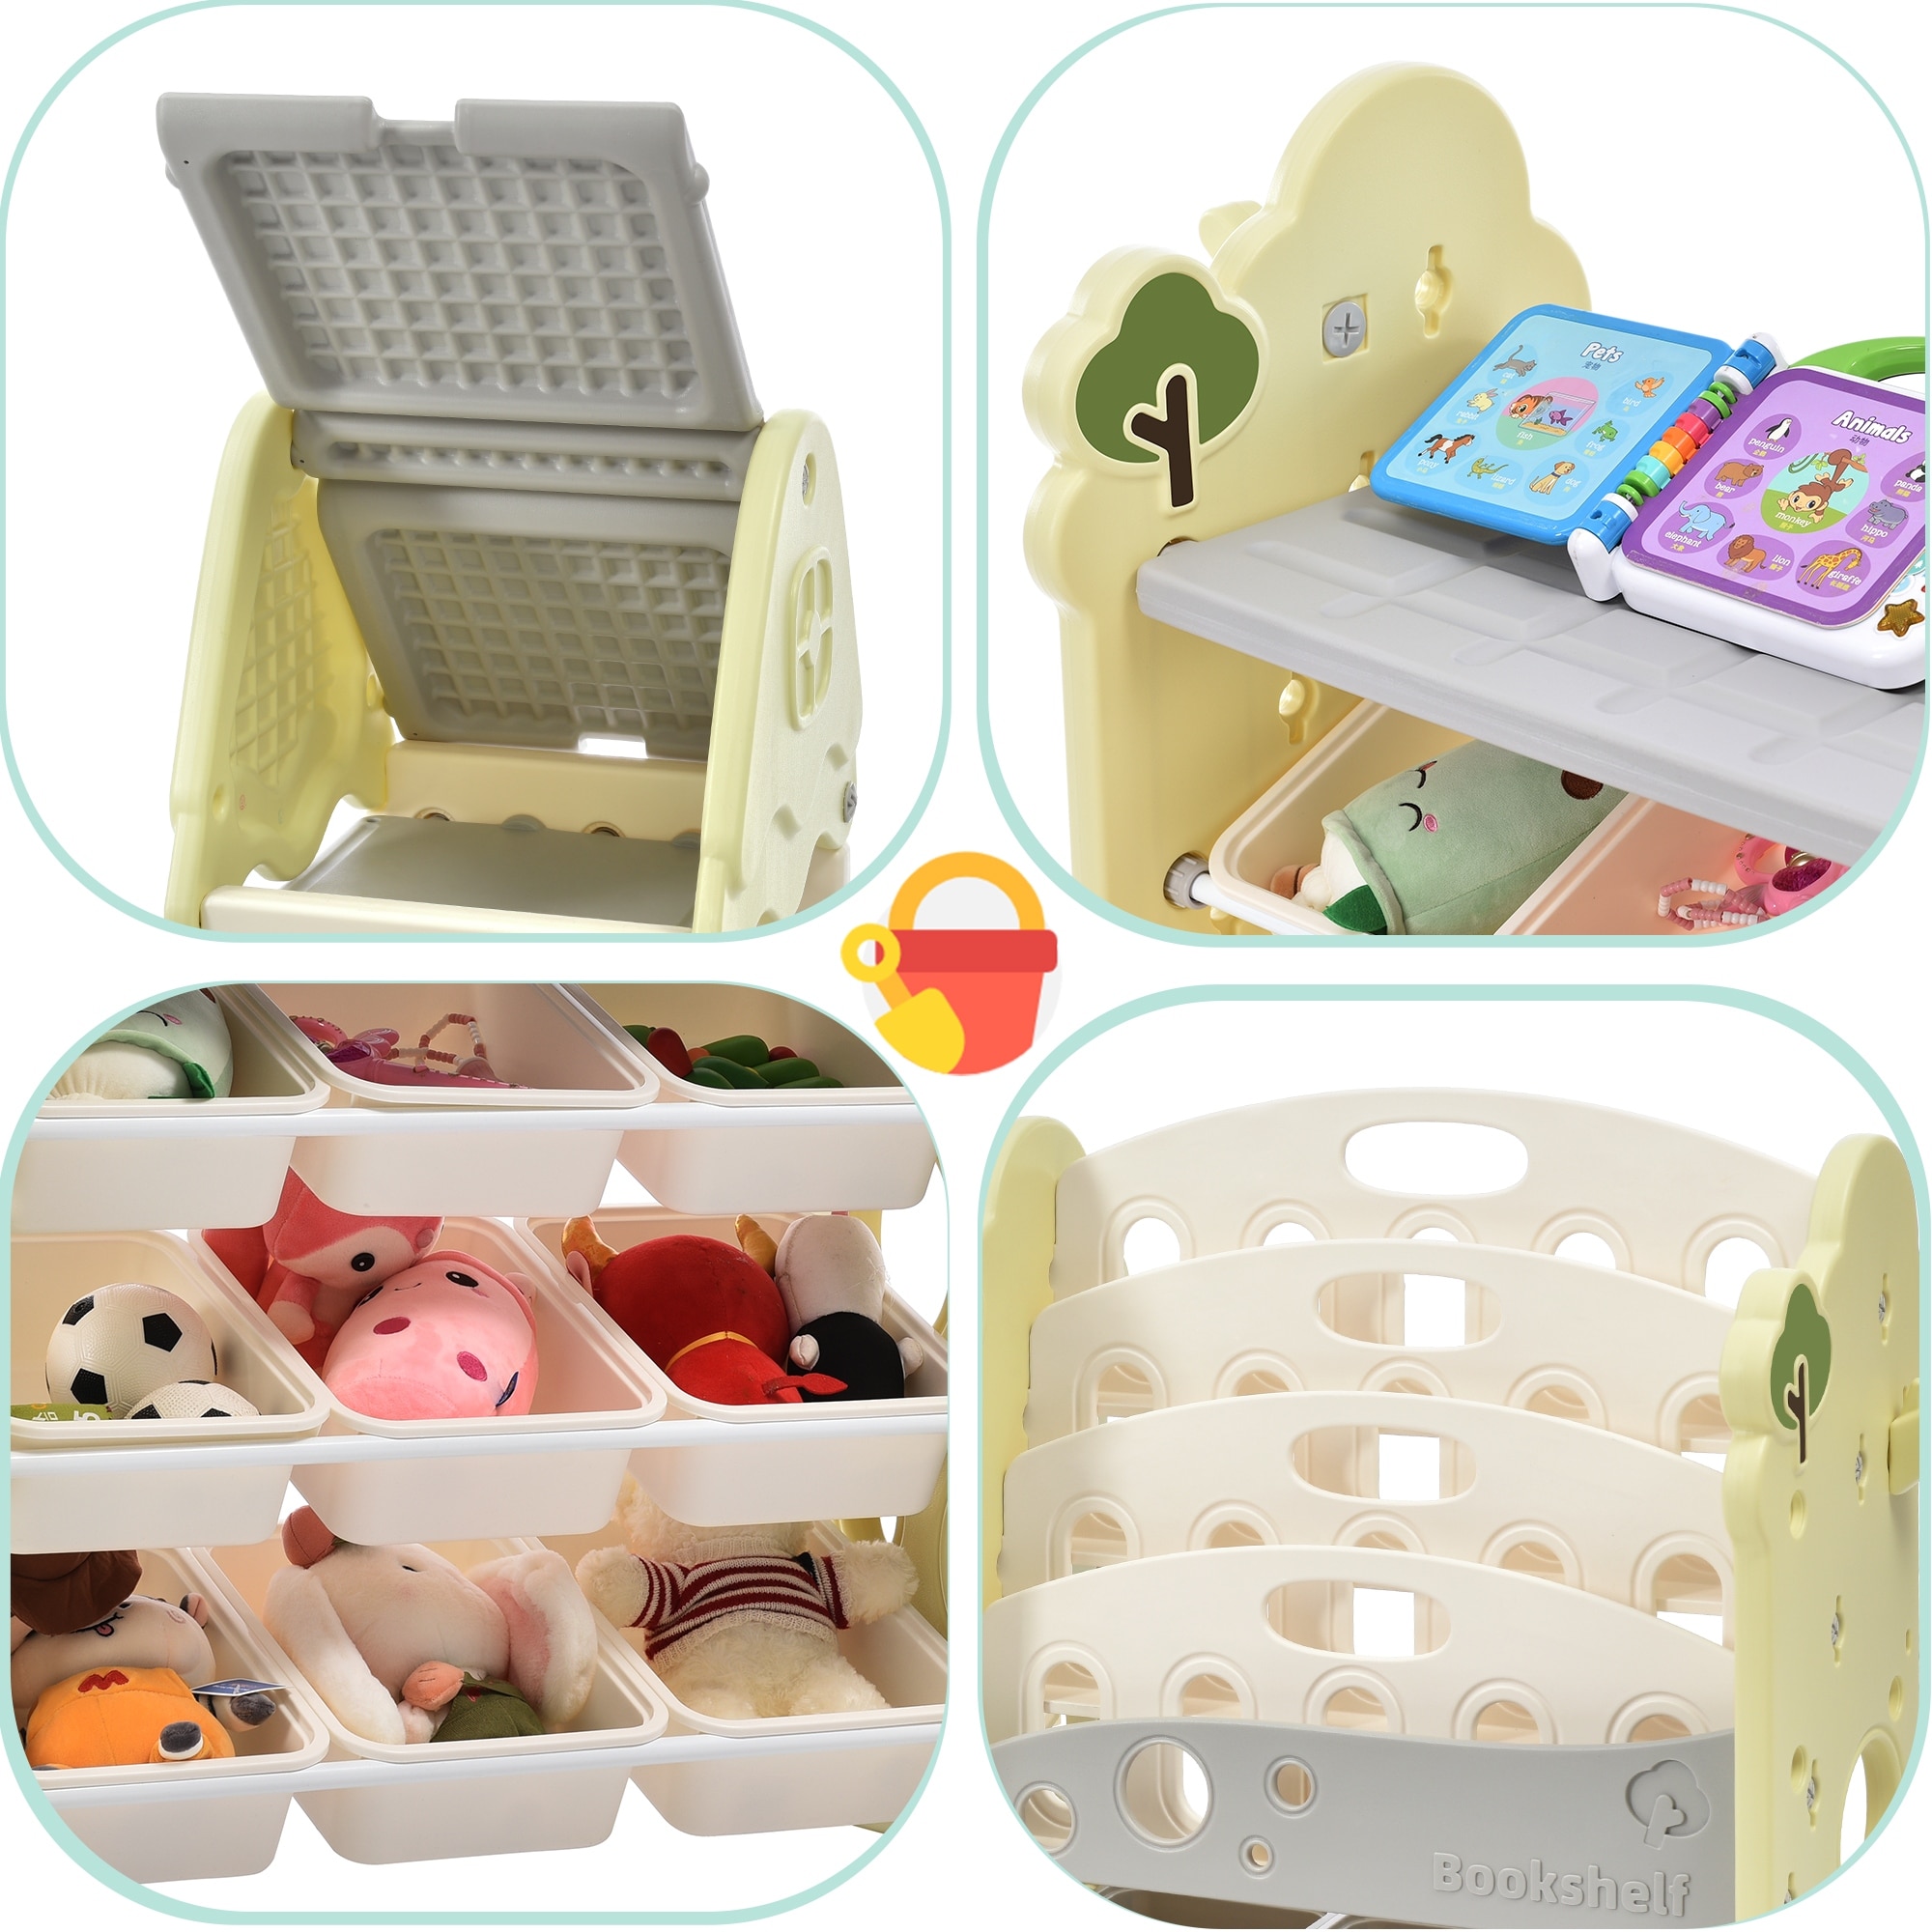 https://ak1.ostkcdn.com/images/products/is/images/direct/60fd94d6d1a7e5f9b9c189a20bee19bb276a69db/Kids-Toy-Storage-Organizer-w-17-Bins-and-4-Bookshelves%2C-Furniture-Set.jpg